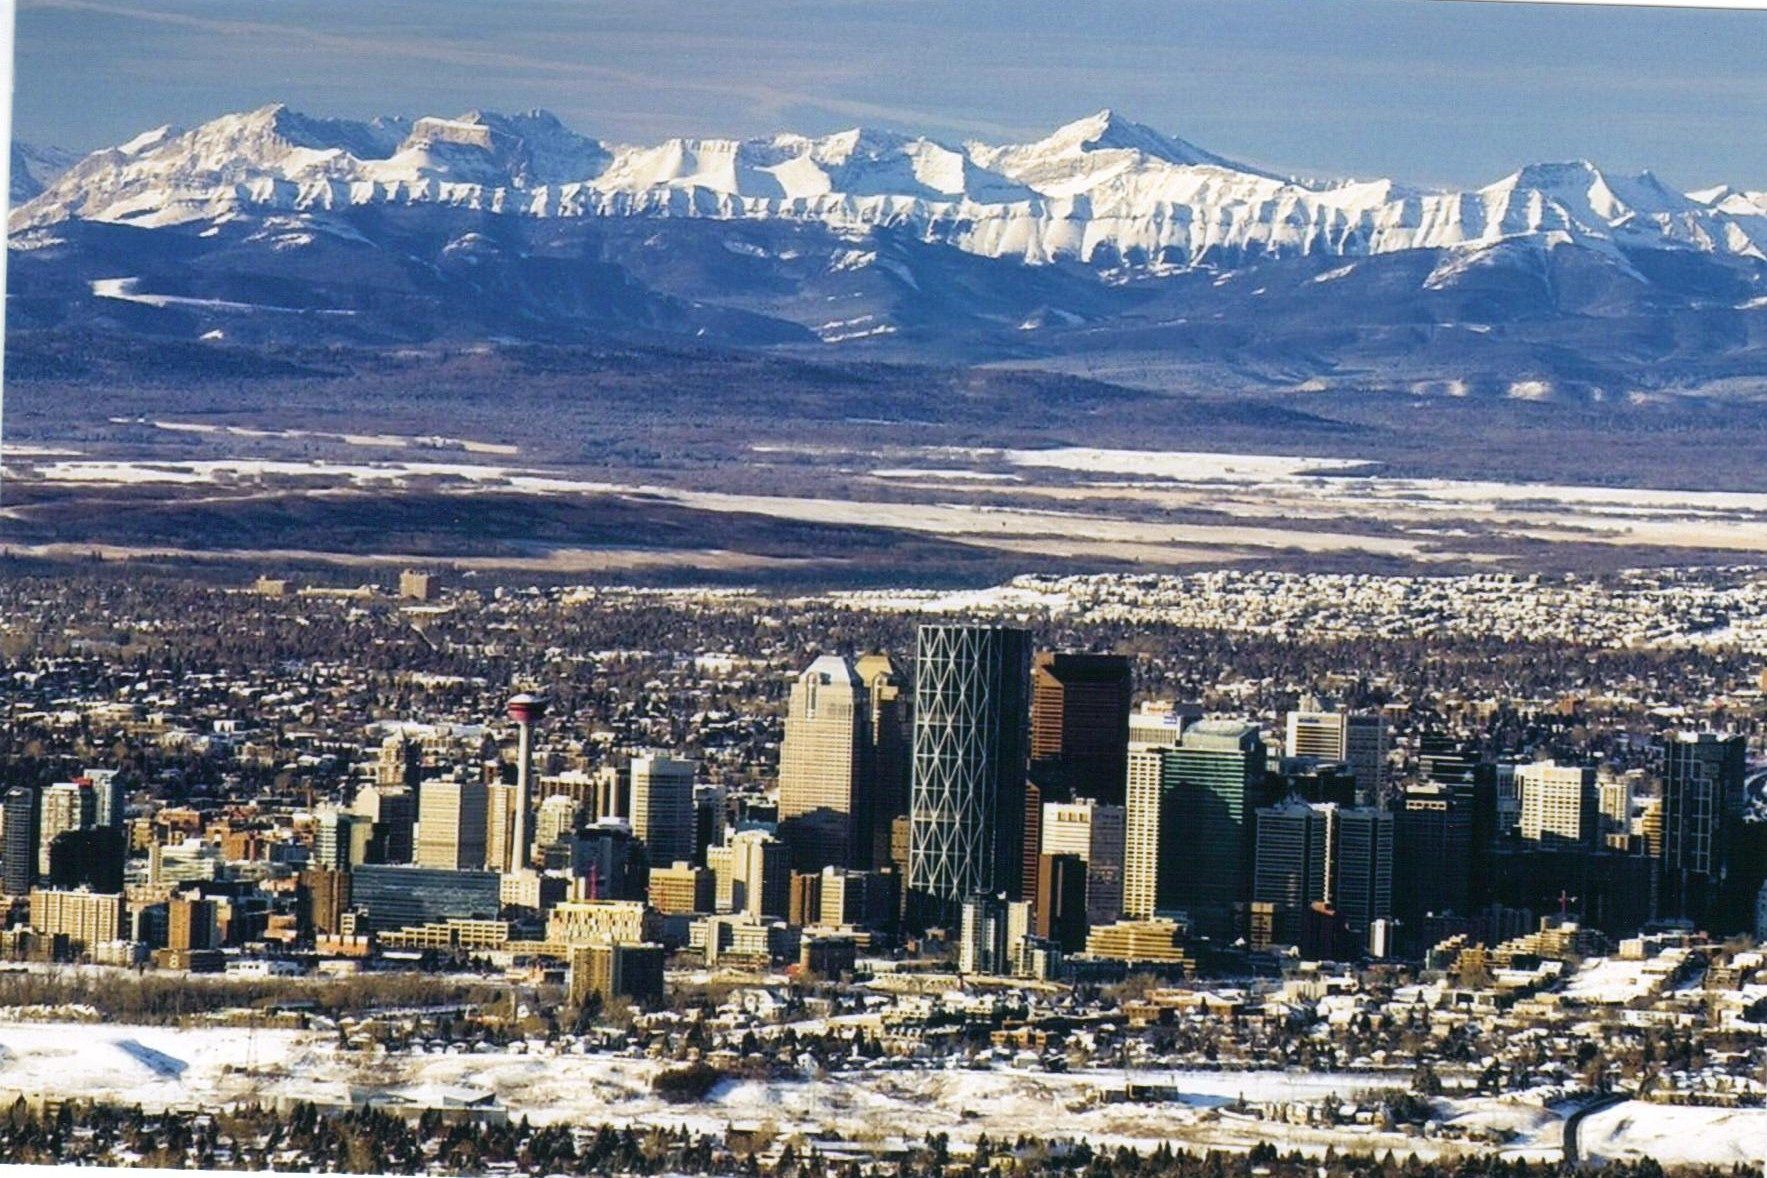 Calgary with the Rockies in the background Places to visit